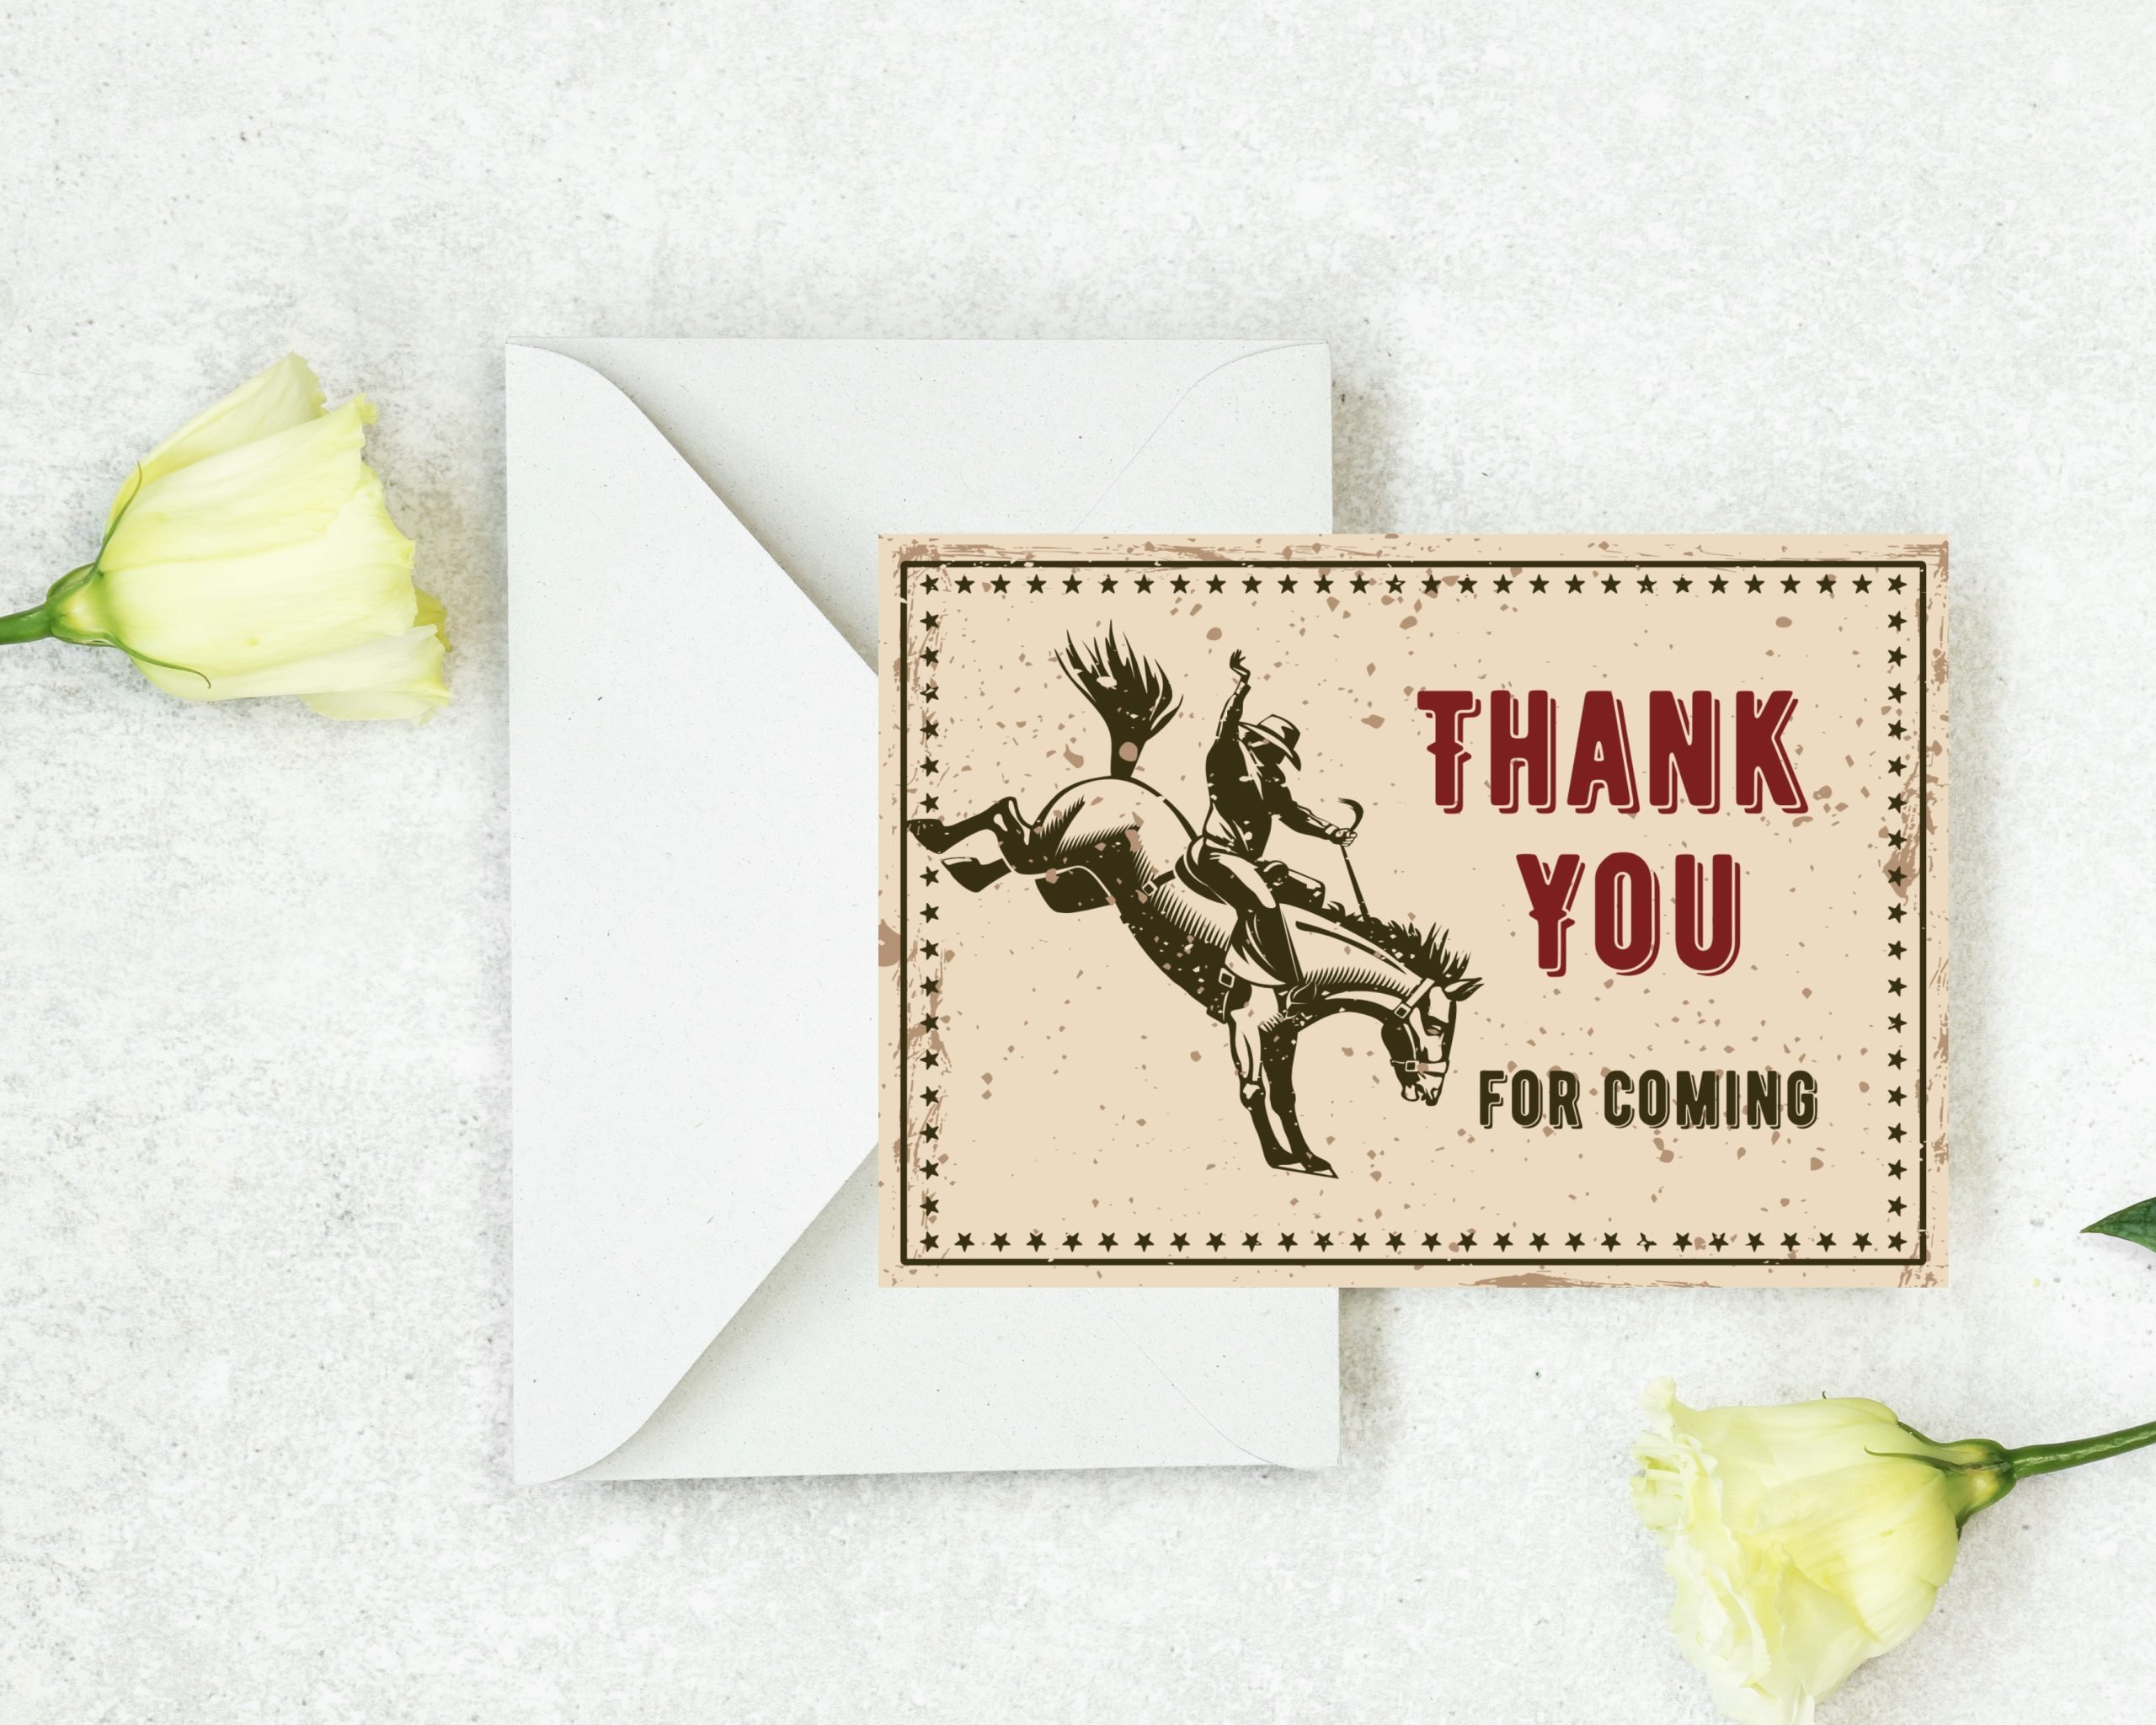 THANK YOU CARDS Editable Rodeo Thank You Card – Printable Cowboy Rustic Horse Theme – Corjl Template 3.5x5" Card Size